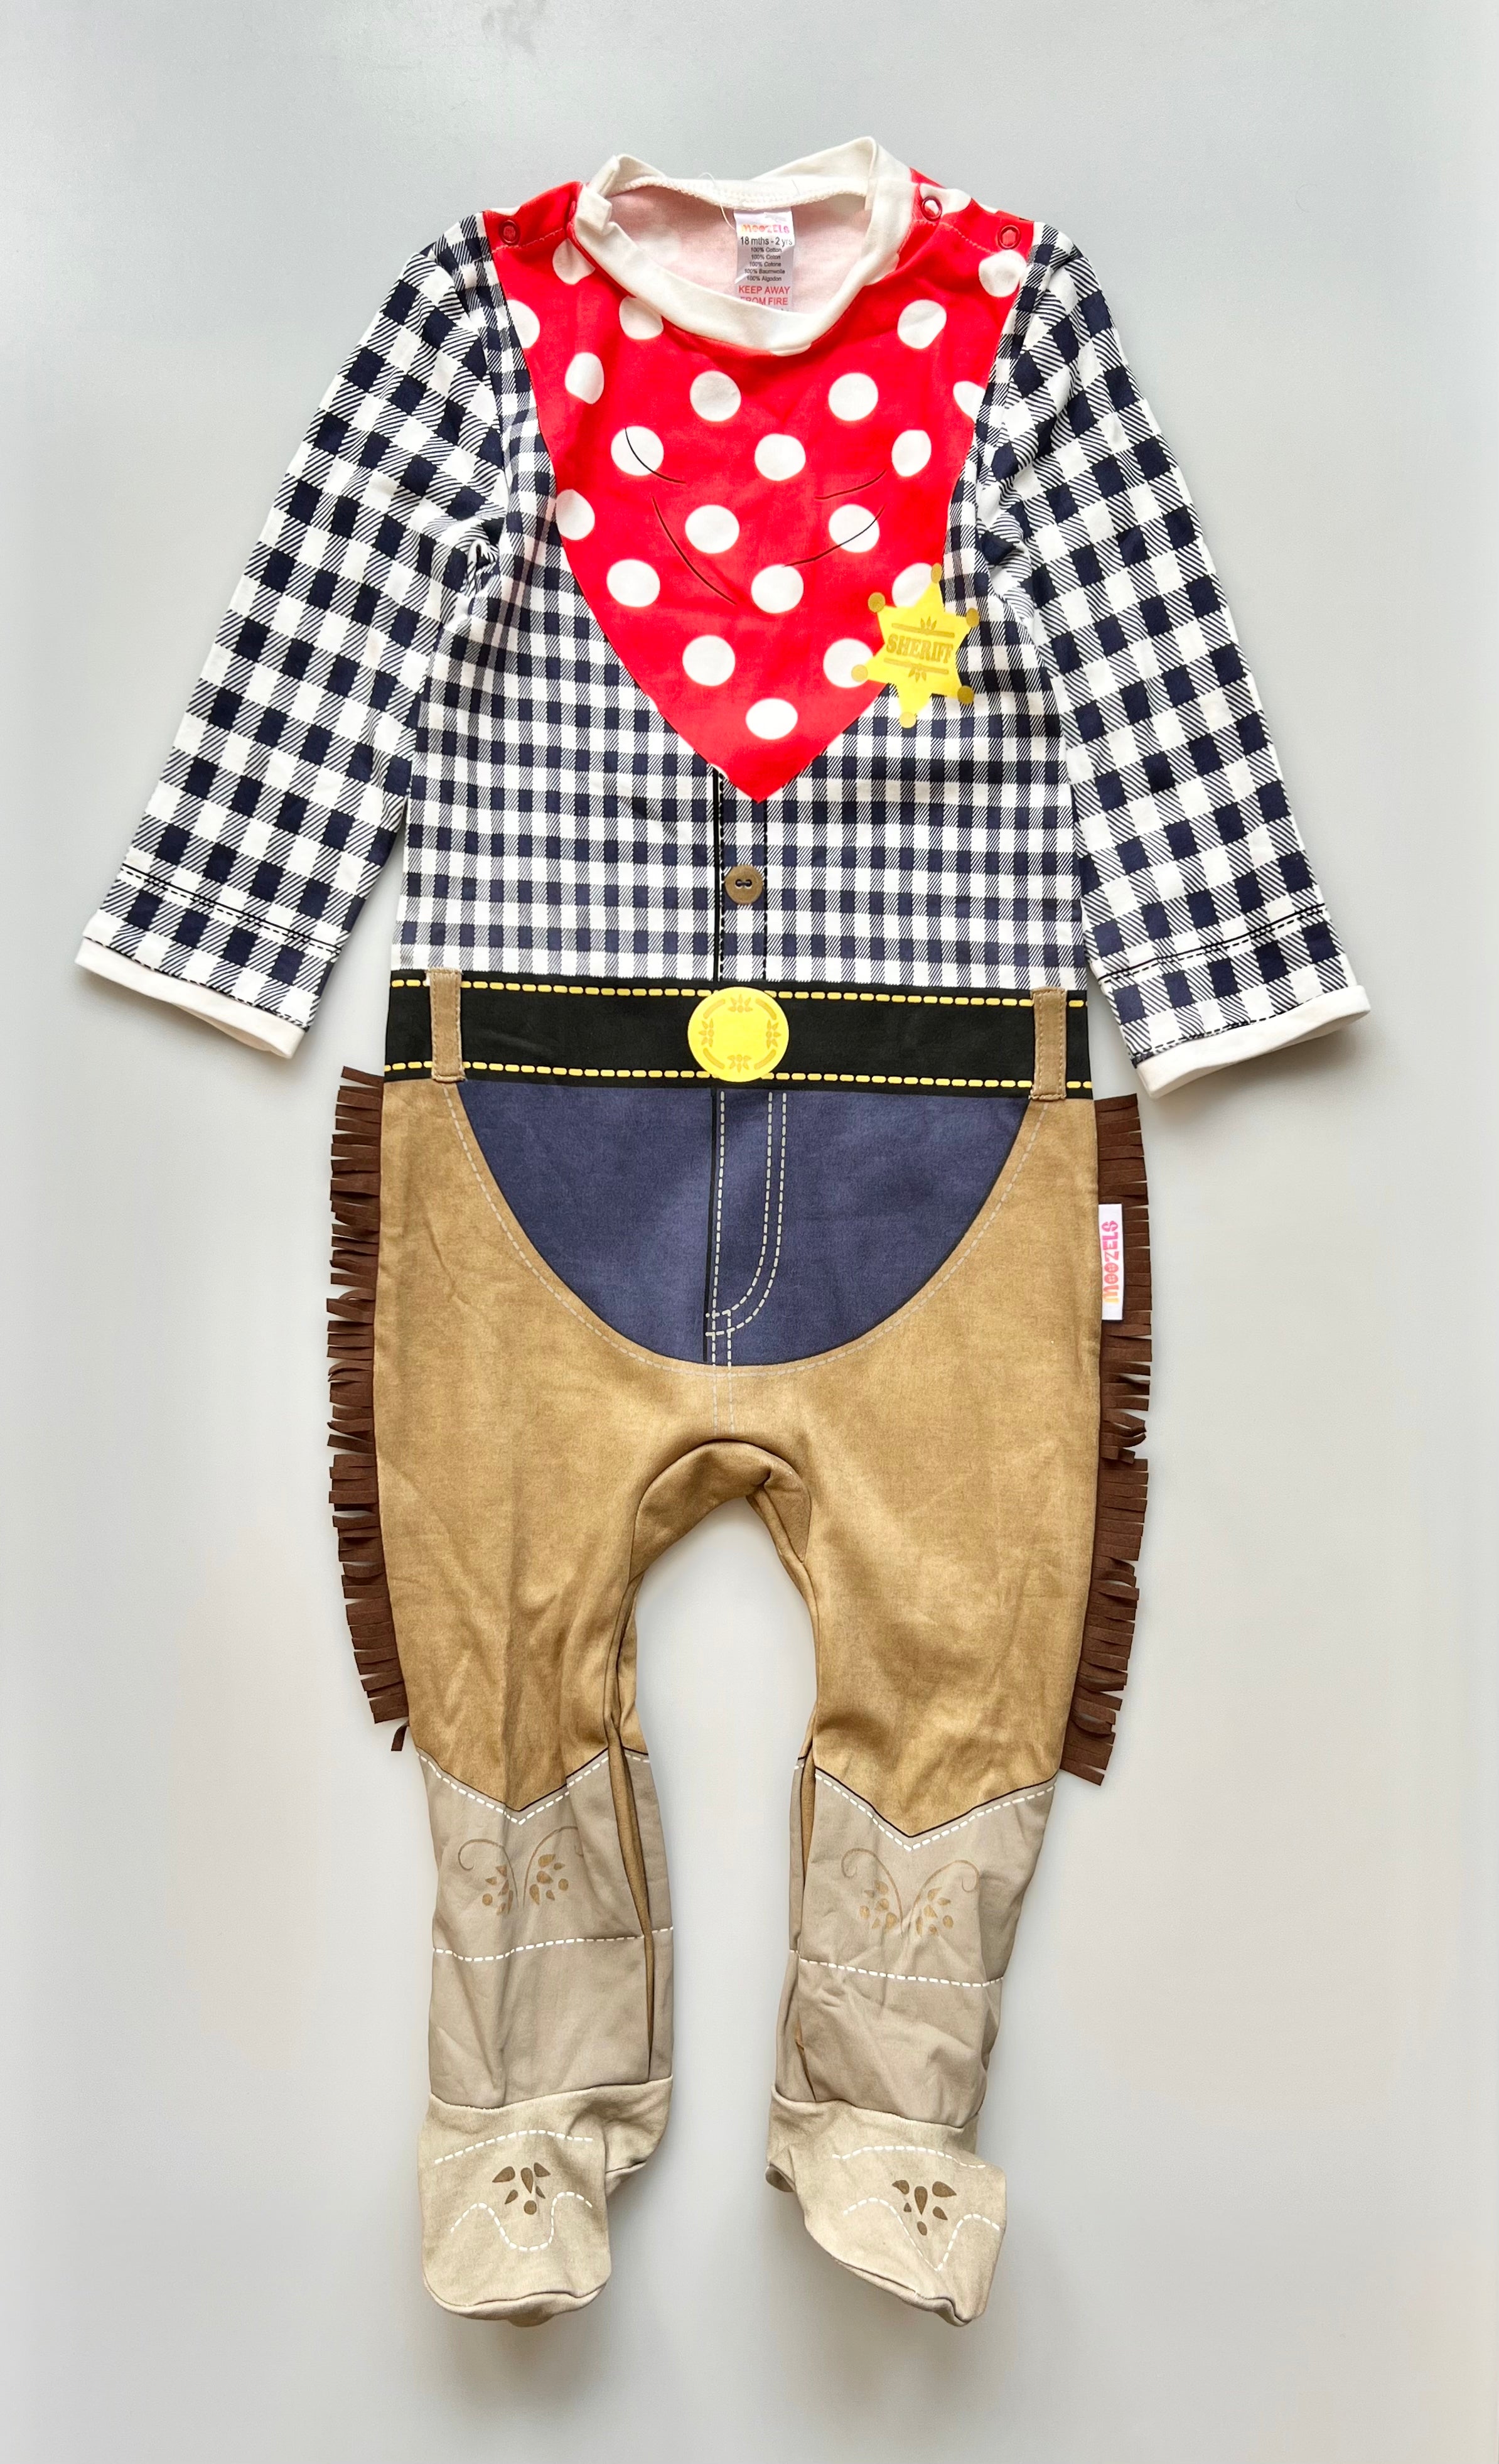 Moozels Cowboy Outfit 18-24 Months